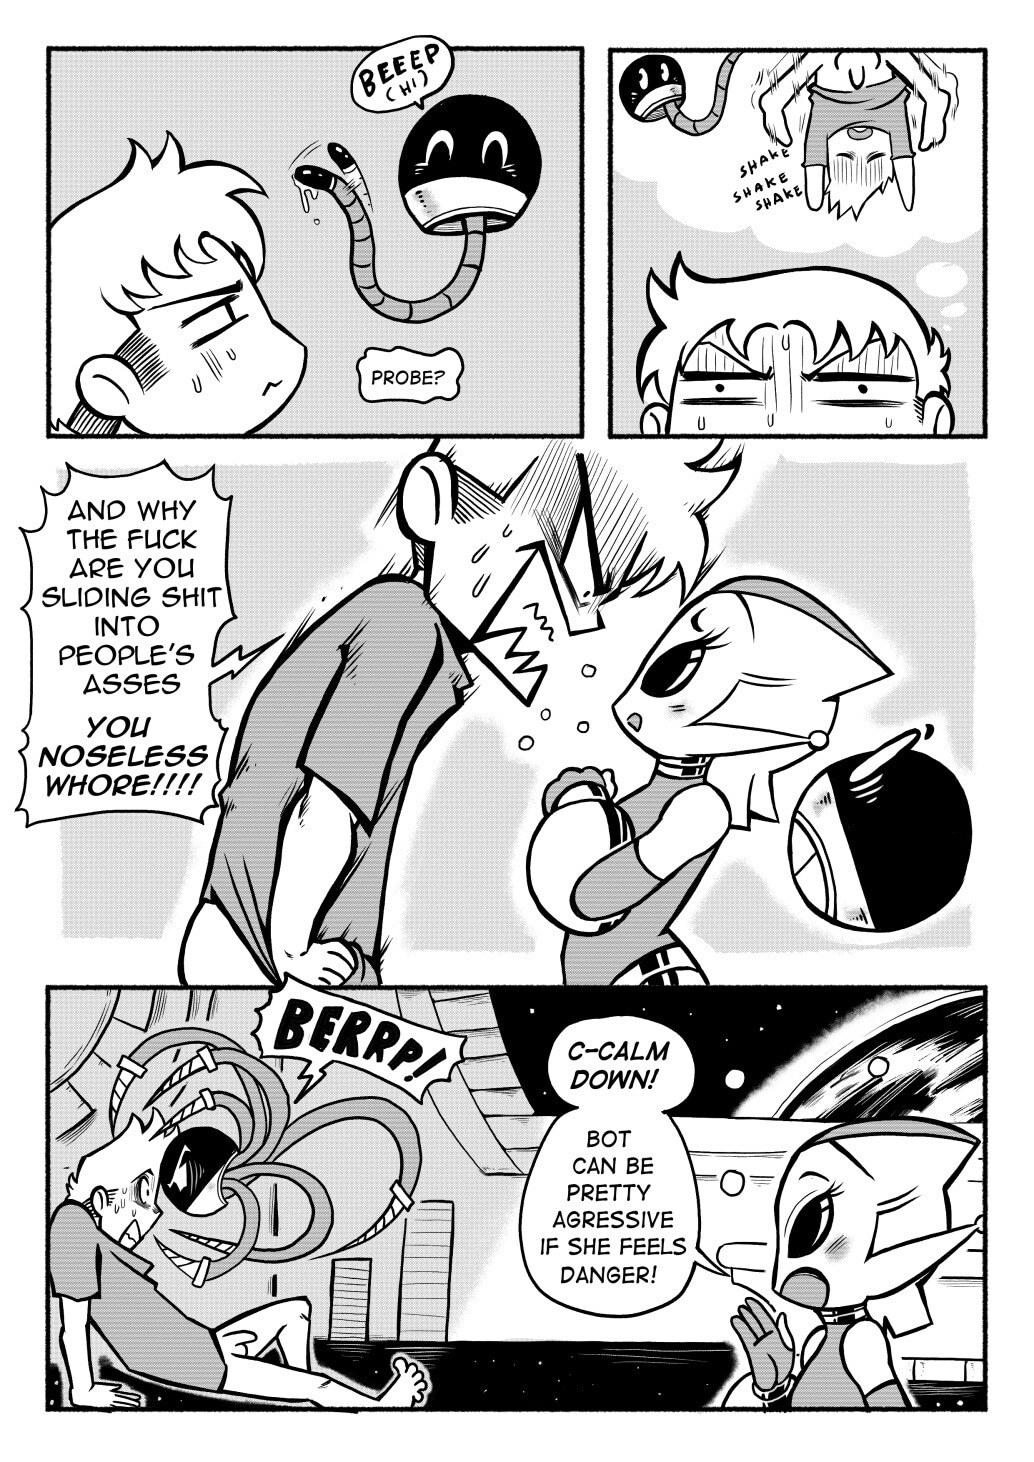 Abducted! - Mr.E - Page 8